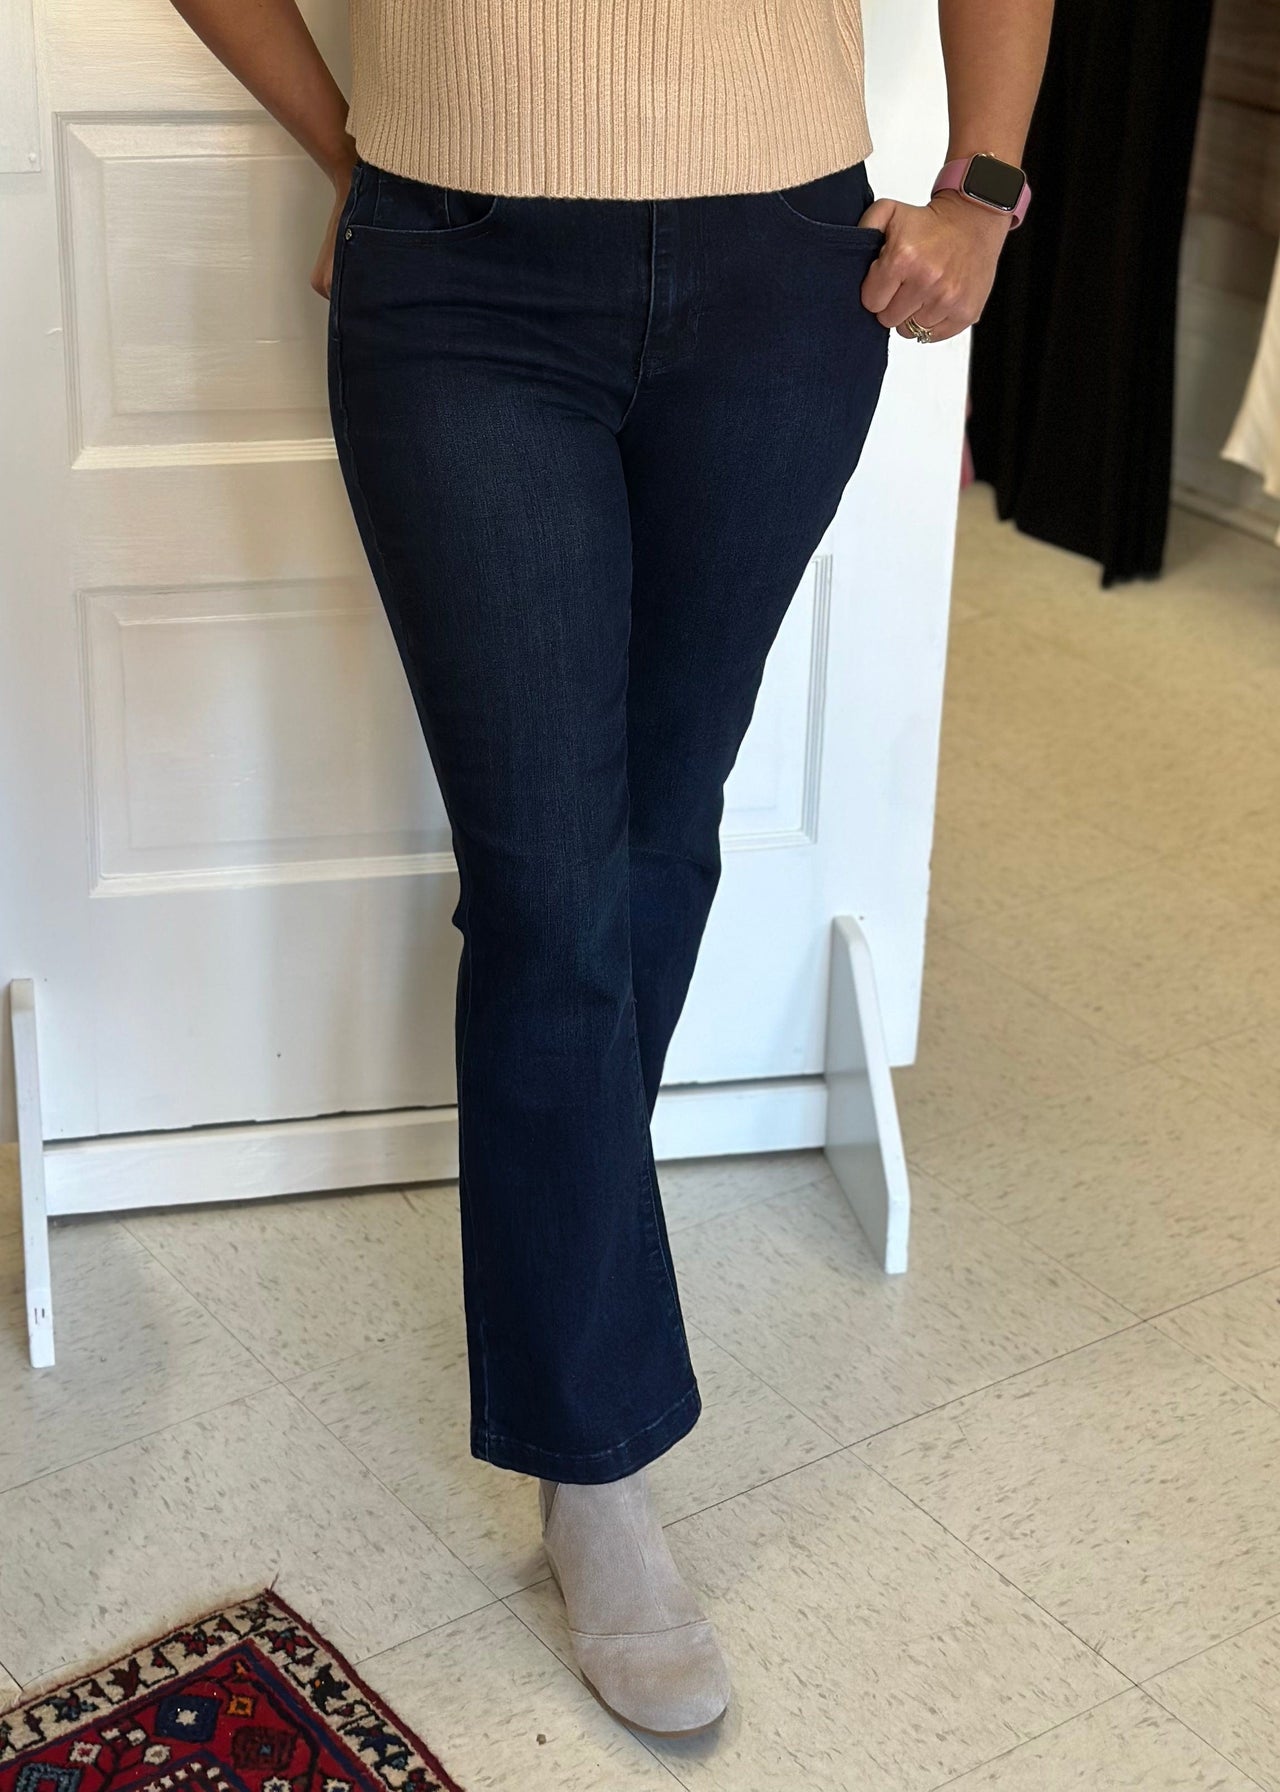 H&M Demin Curvy Jeggings Size 6 - $5 - From Star